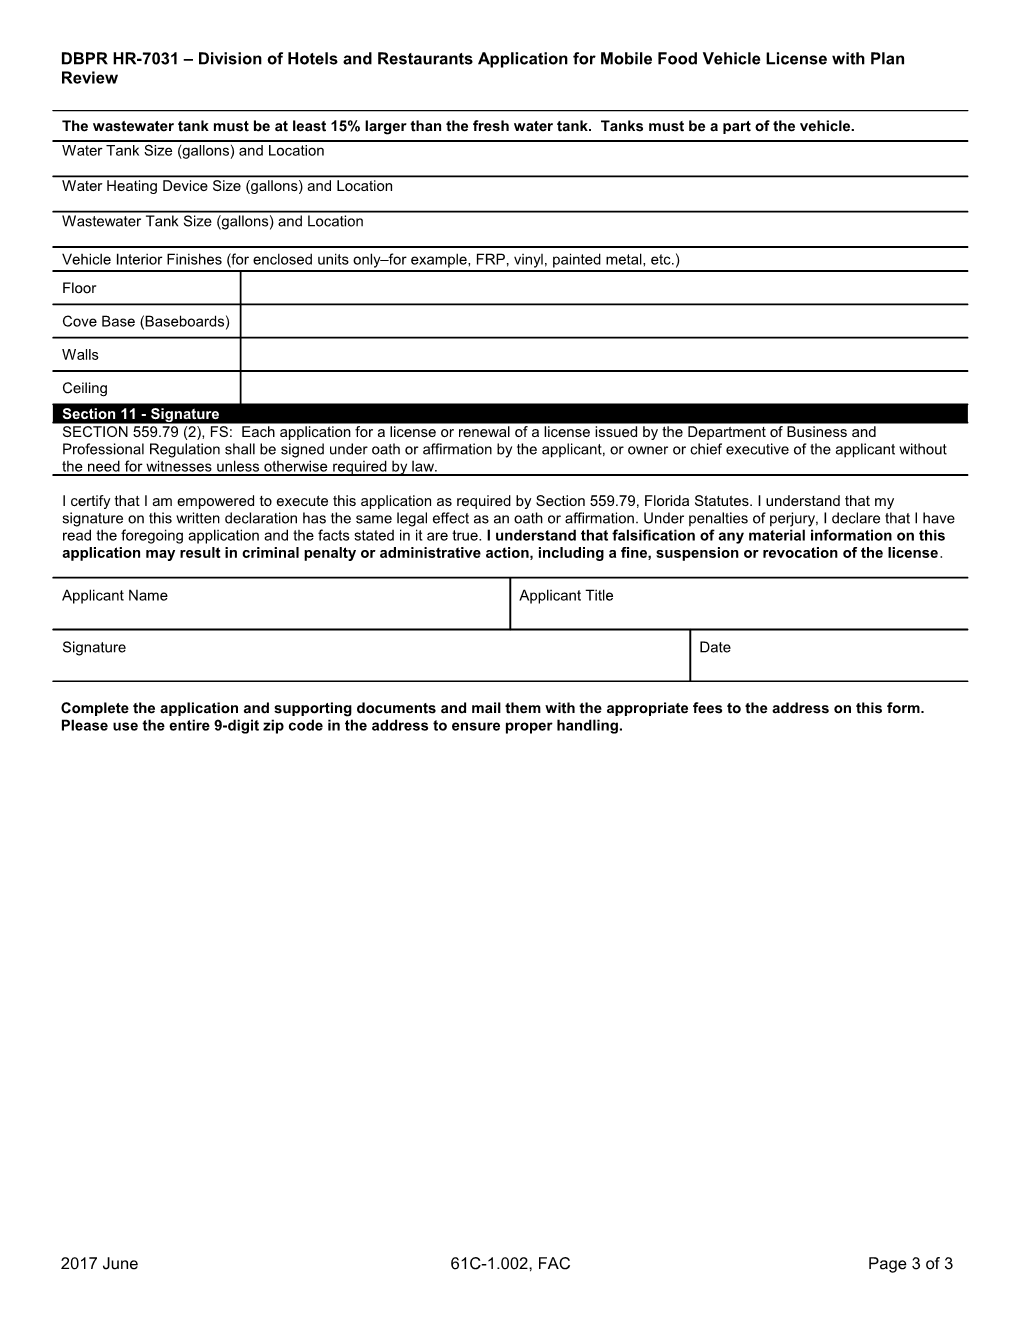 DBPR HR-7031 Division of Hotels and Restaurants Application for Mobile Food Vehicle License